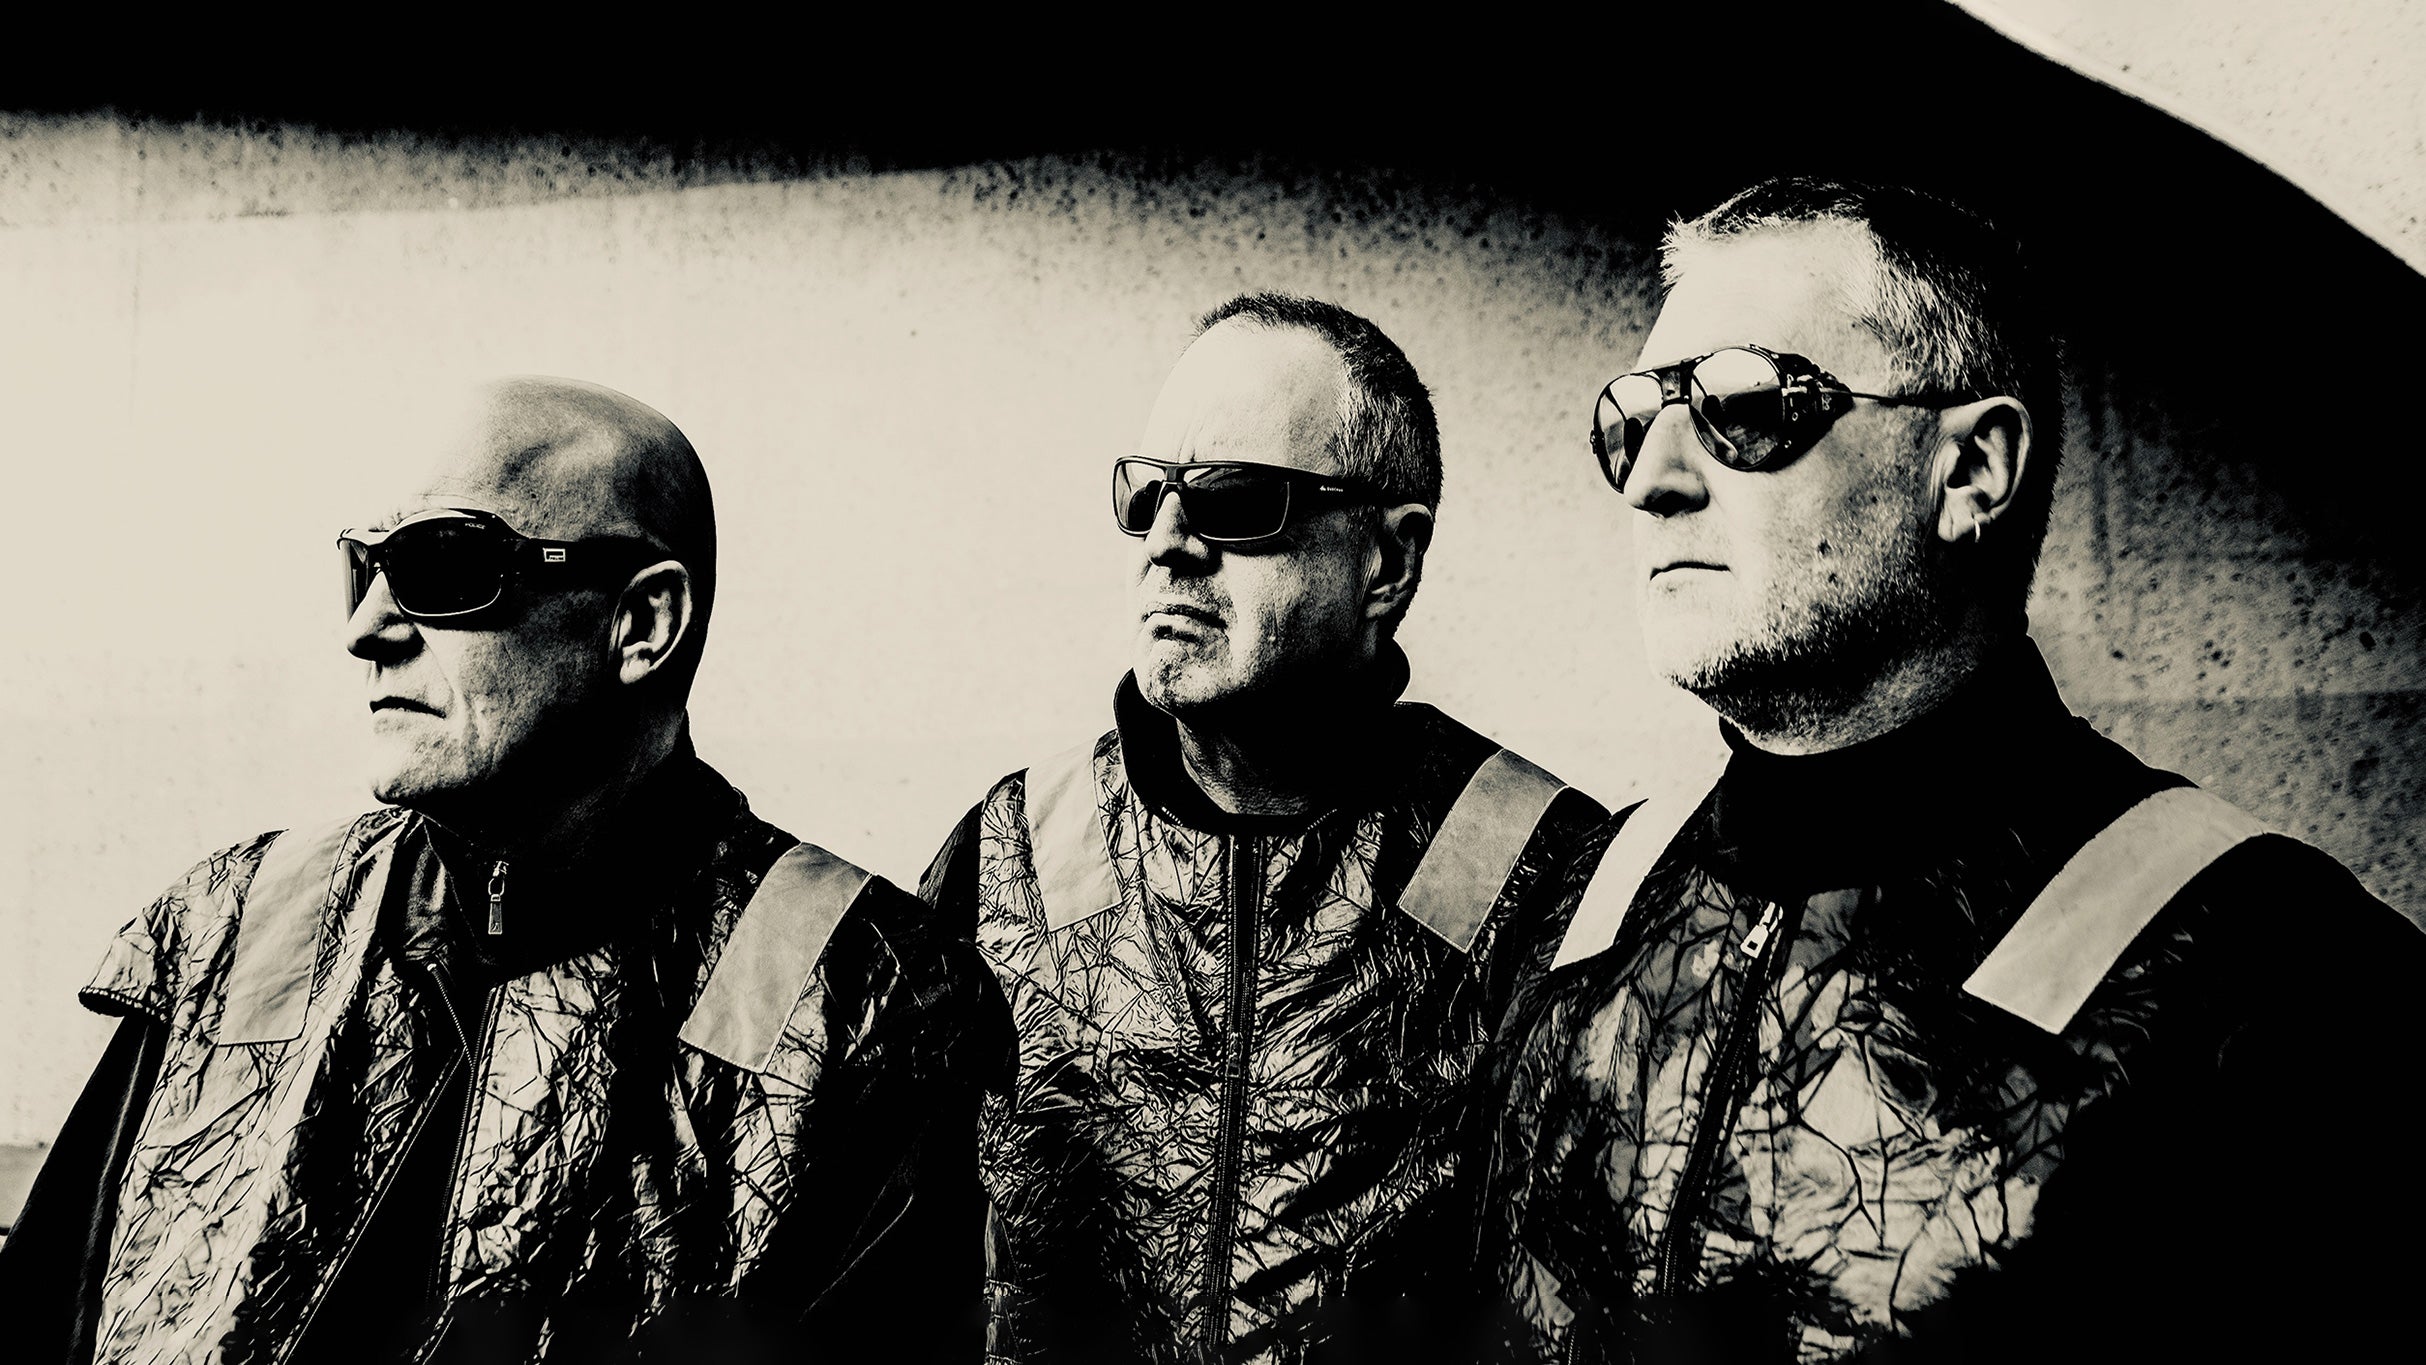 new presale password for SNW Sideshow ft. Front 242 & Nitzer Ebb presale tickets in Las Vegas